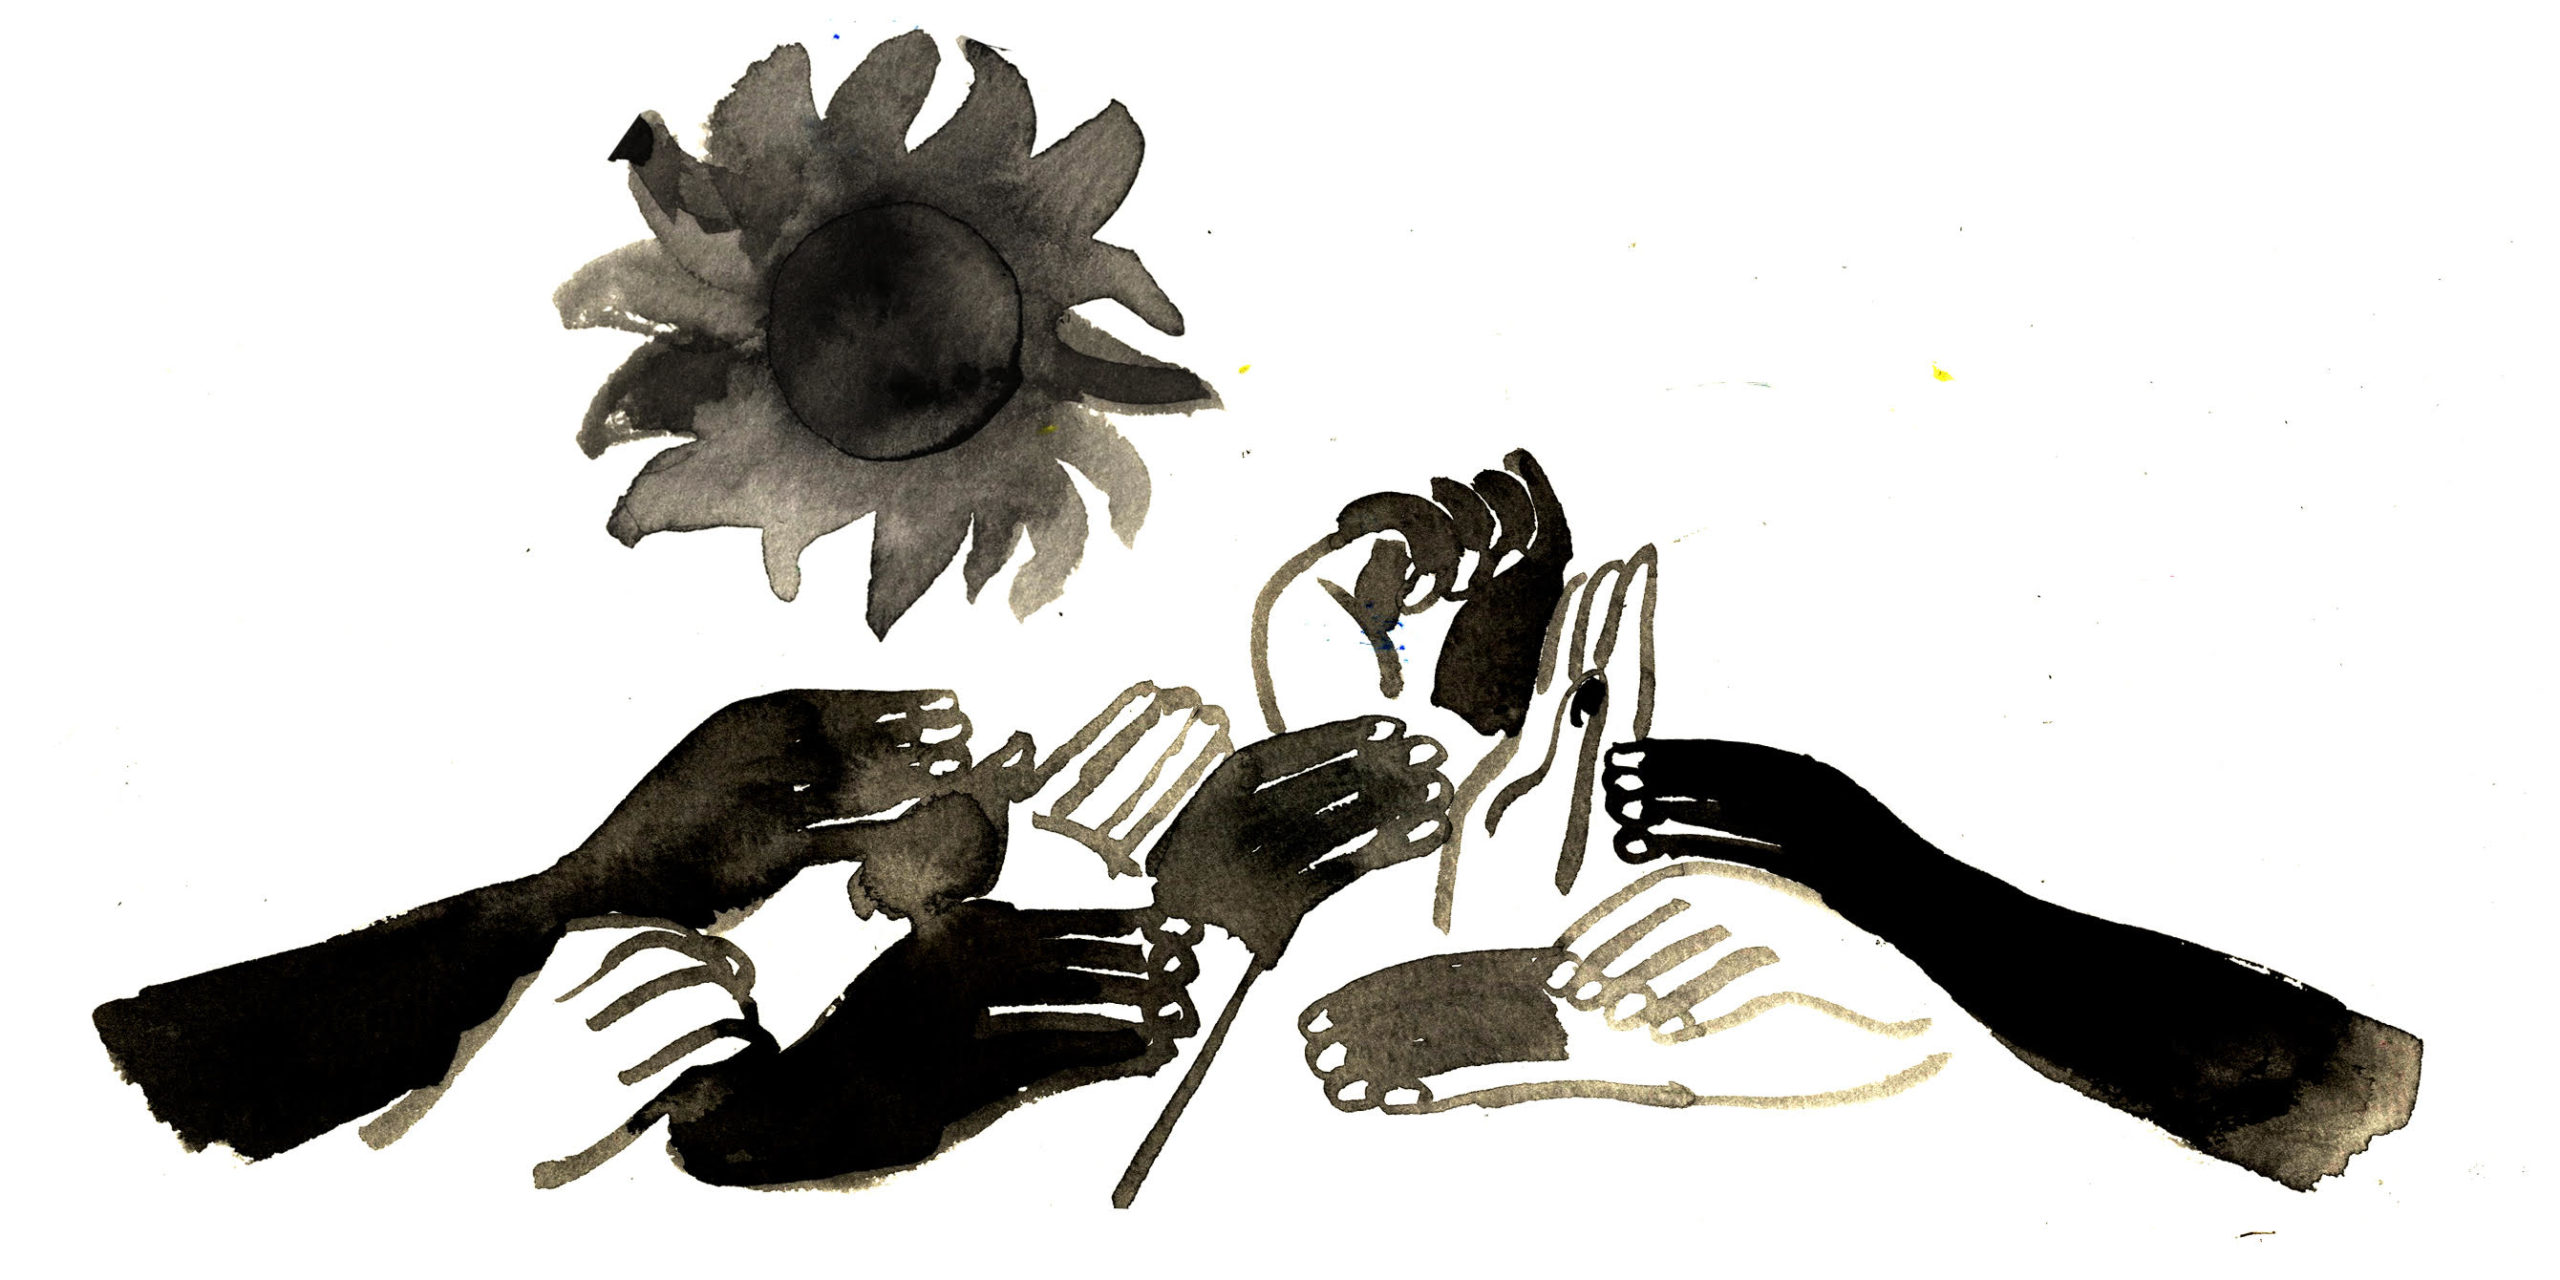 A black and white watercolor painting of many hands, lifting up together towards the sun.